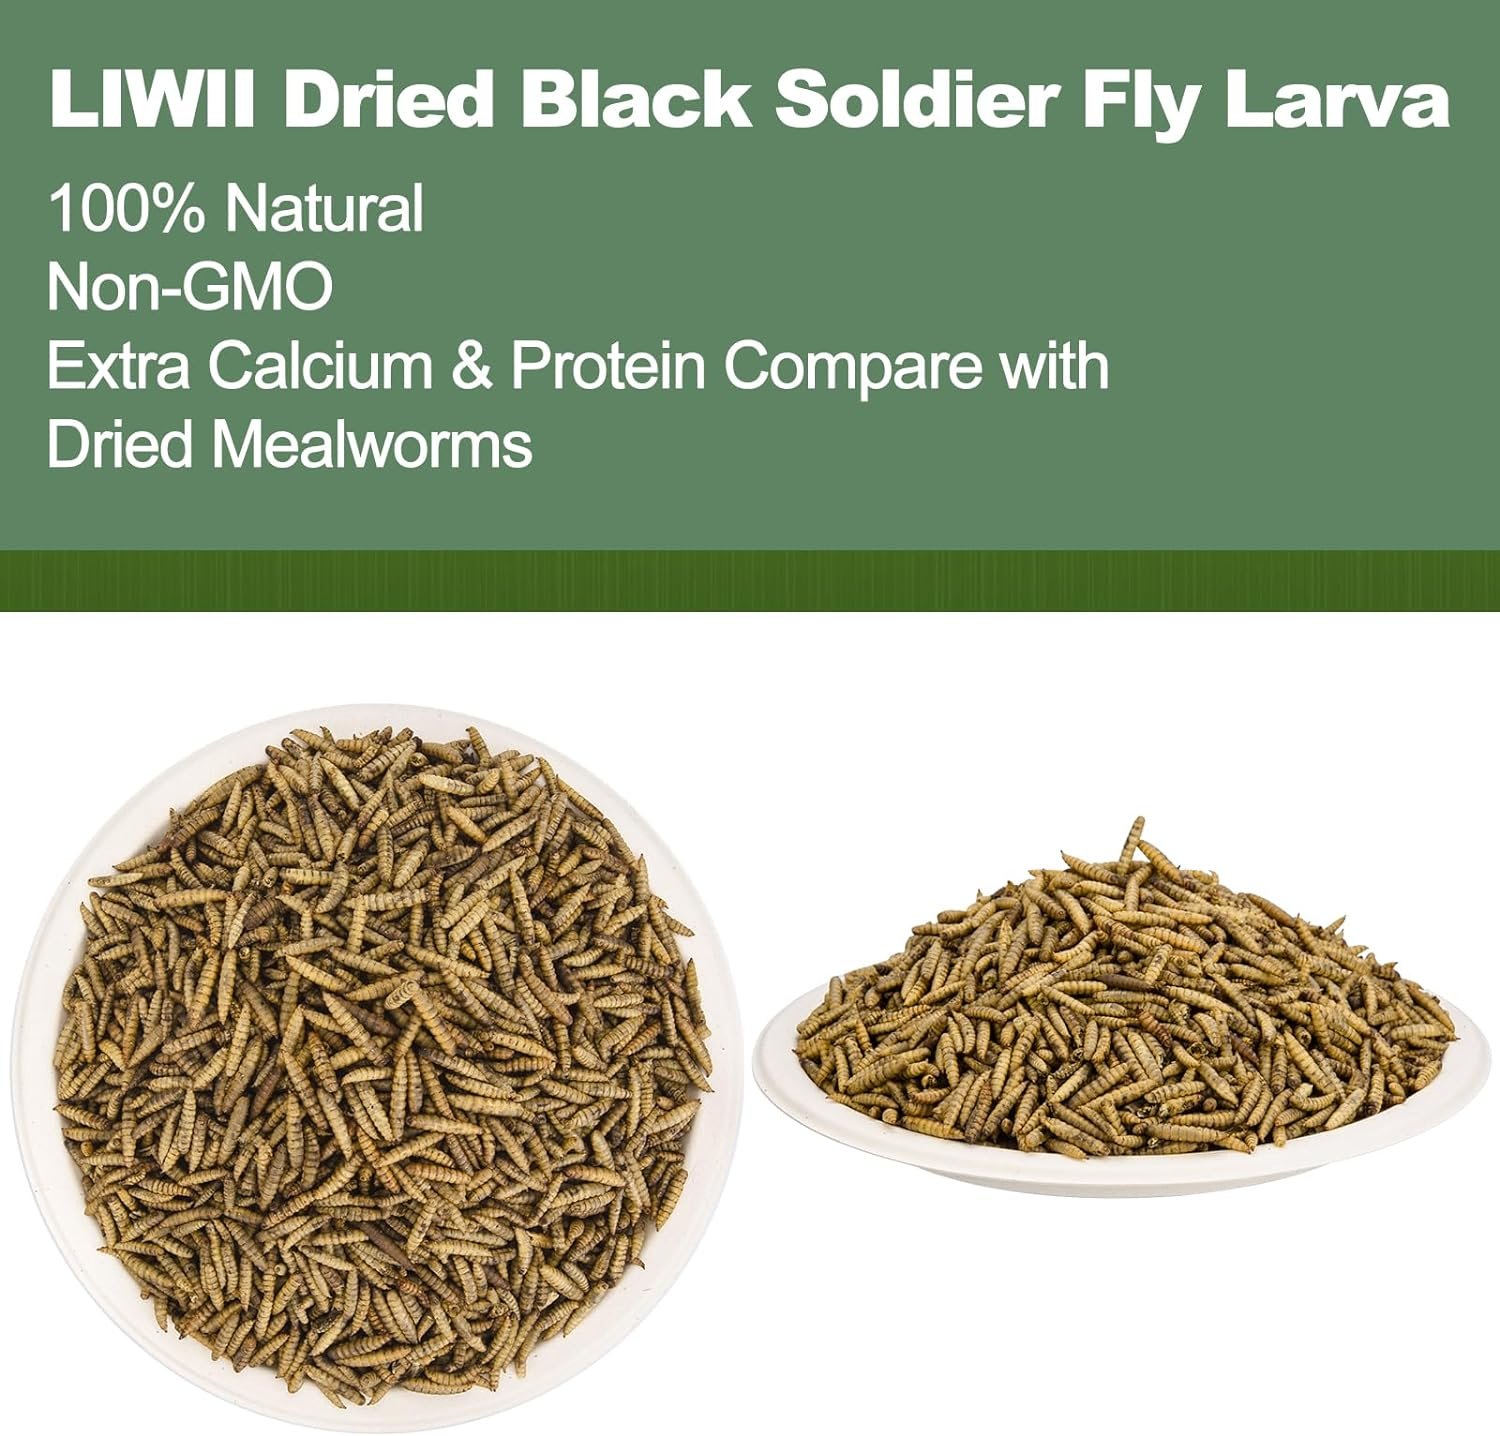 LIWII Dried Black Soldier Fly Larva 10 LBS-100% Natural Non-GMO Extra Calcium  Protein Compare with Dried Mealworms, Chicken Treats, Bearded Dragon Food, Wild Birds, Hedgehog, Turtles, Reptile Food